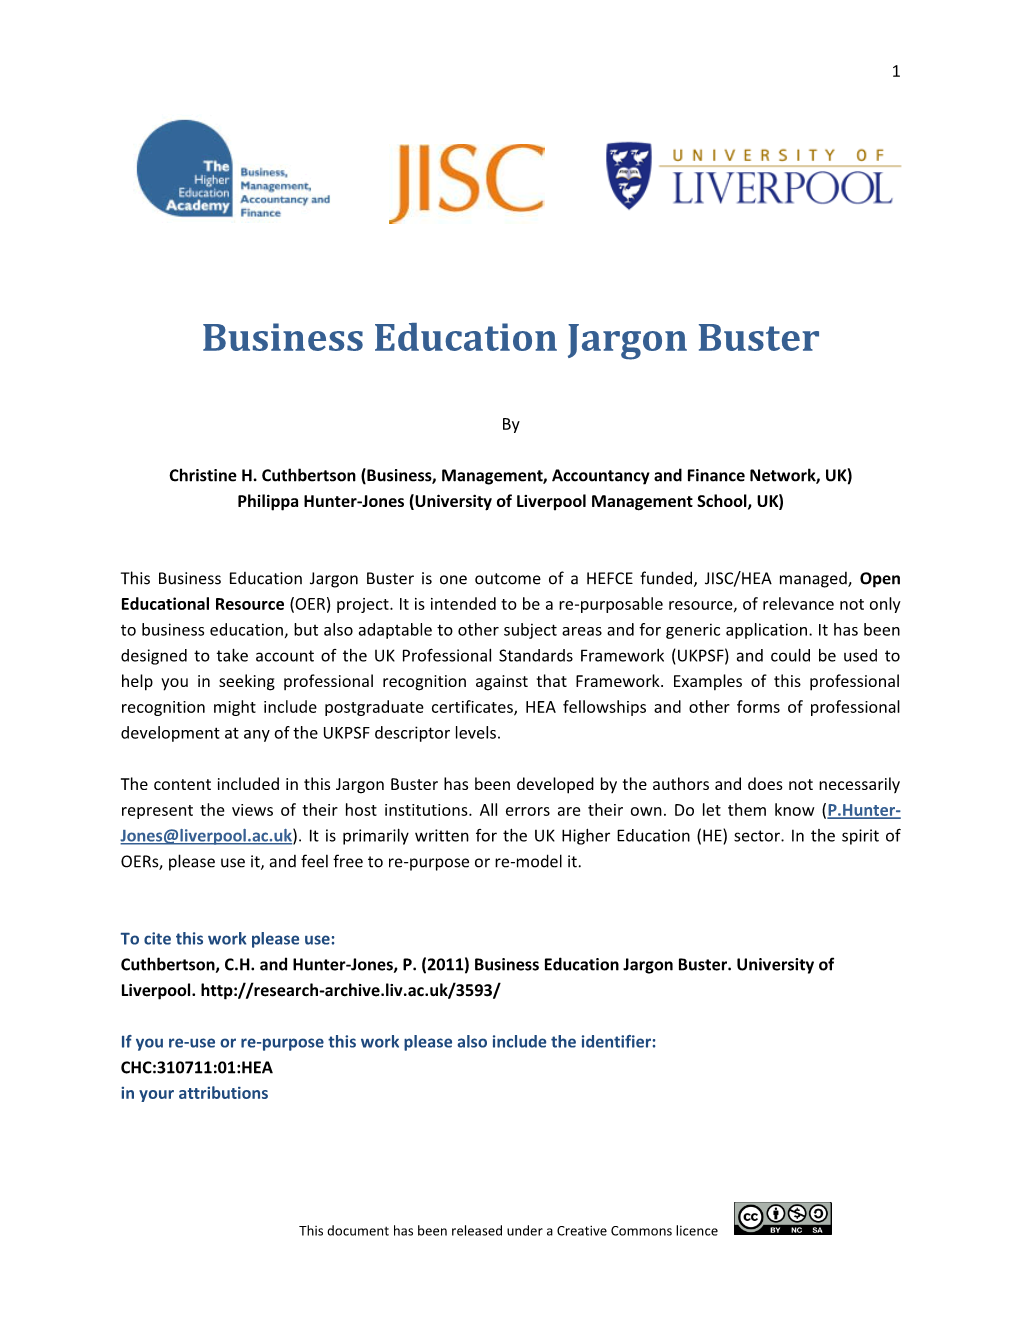 Business Education Jargon Buster